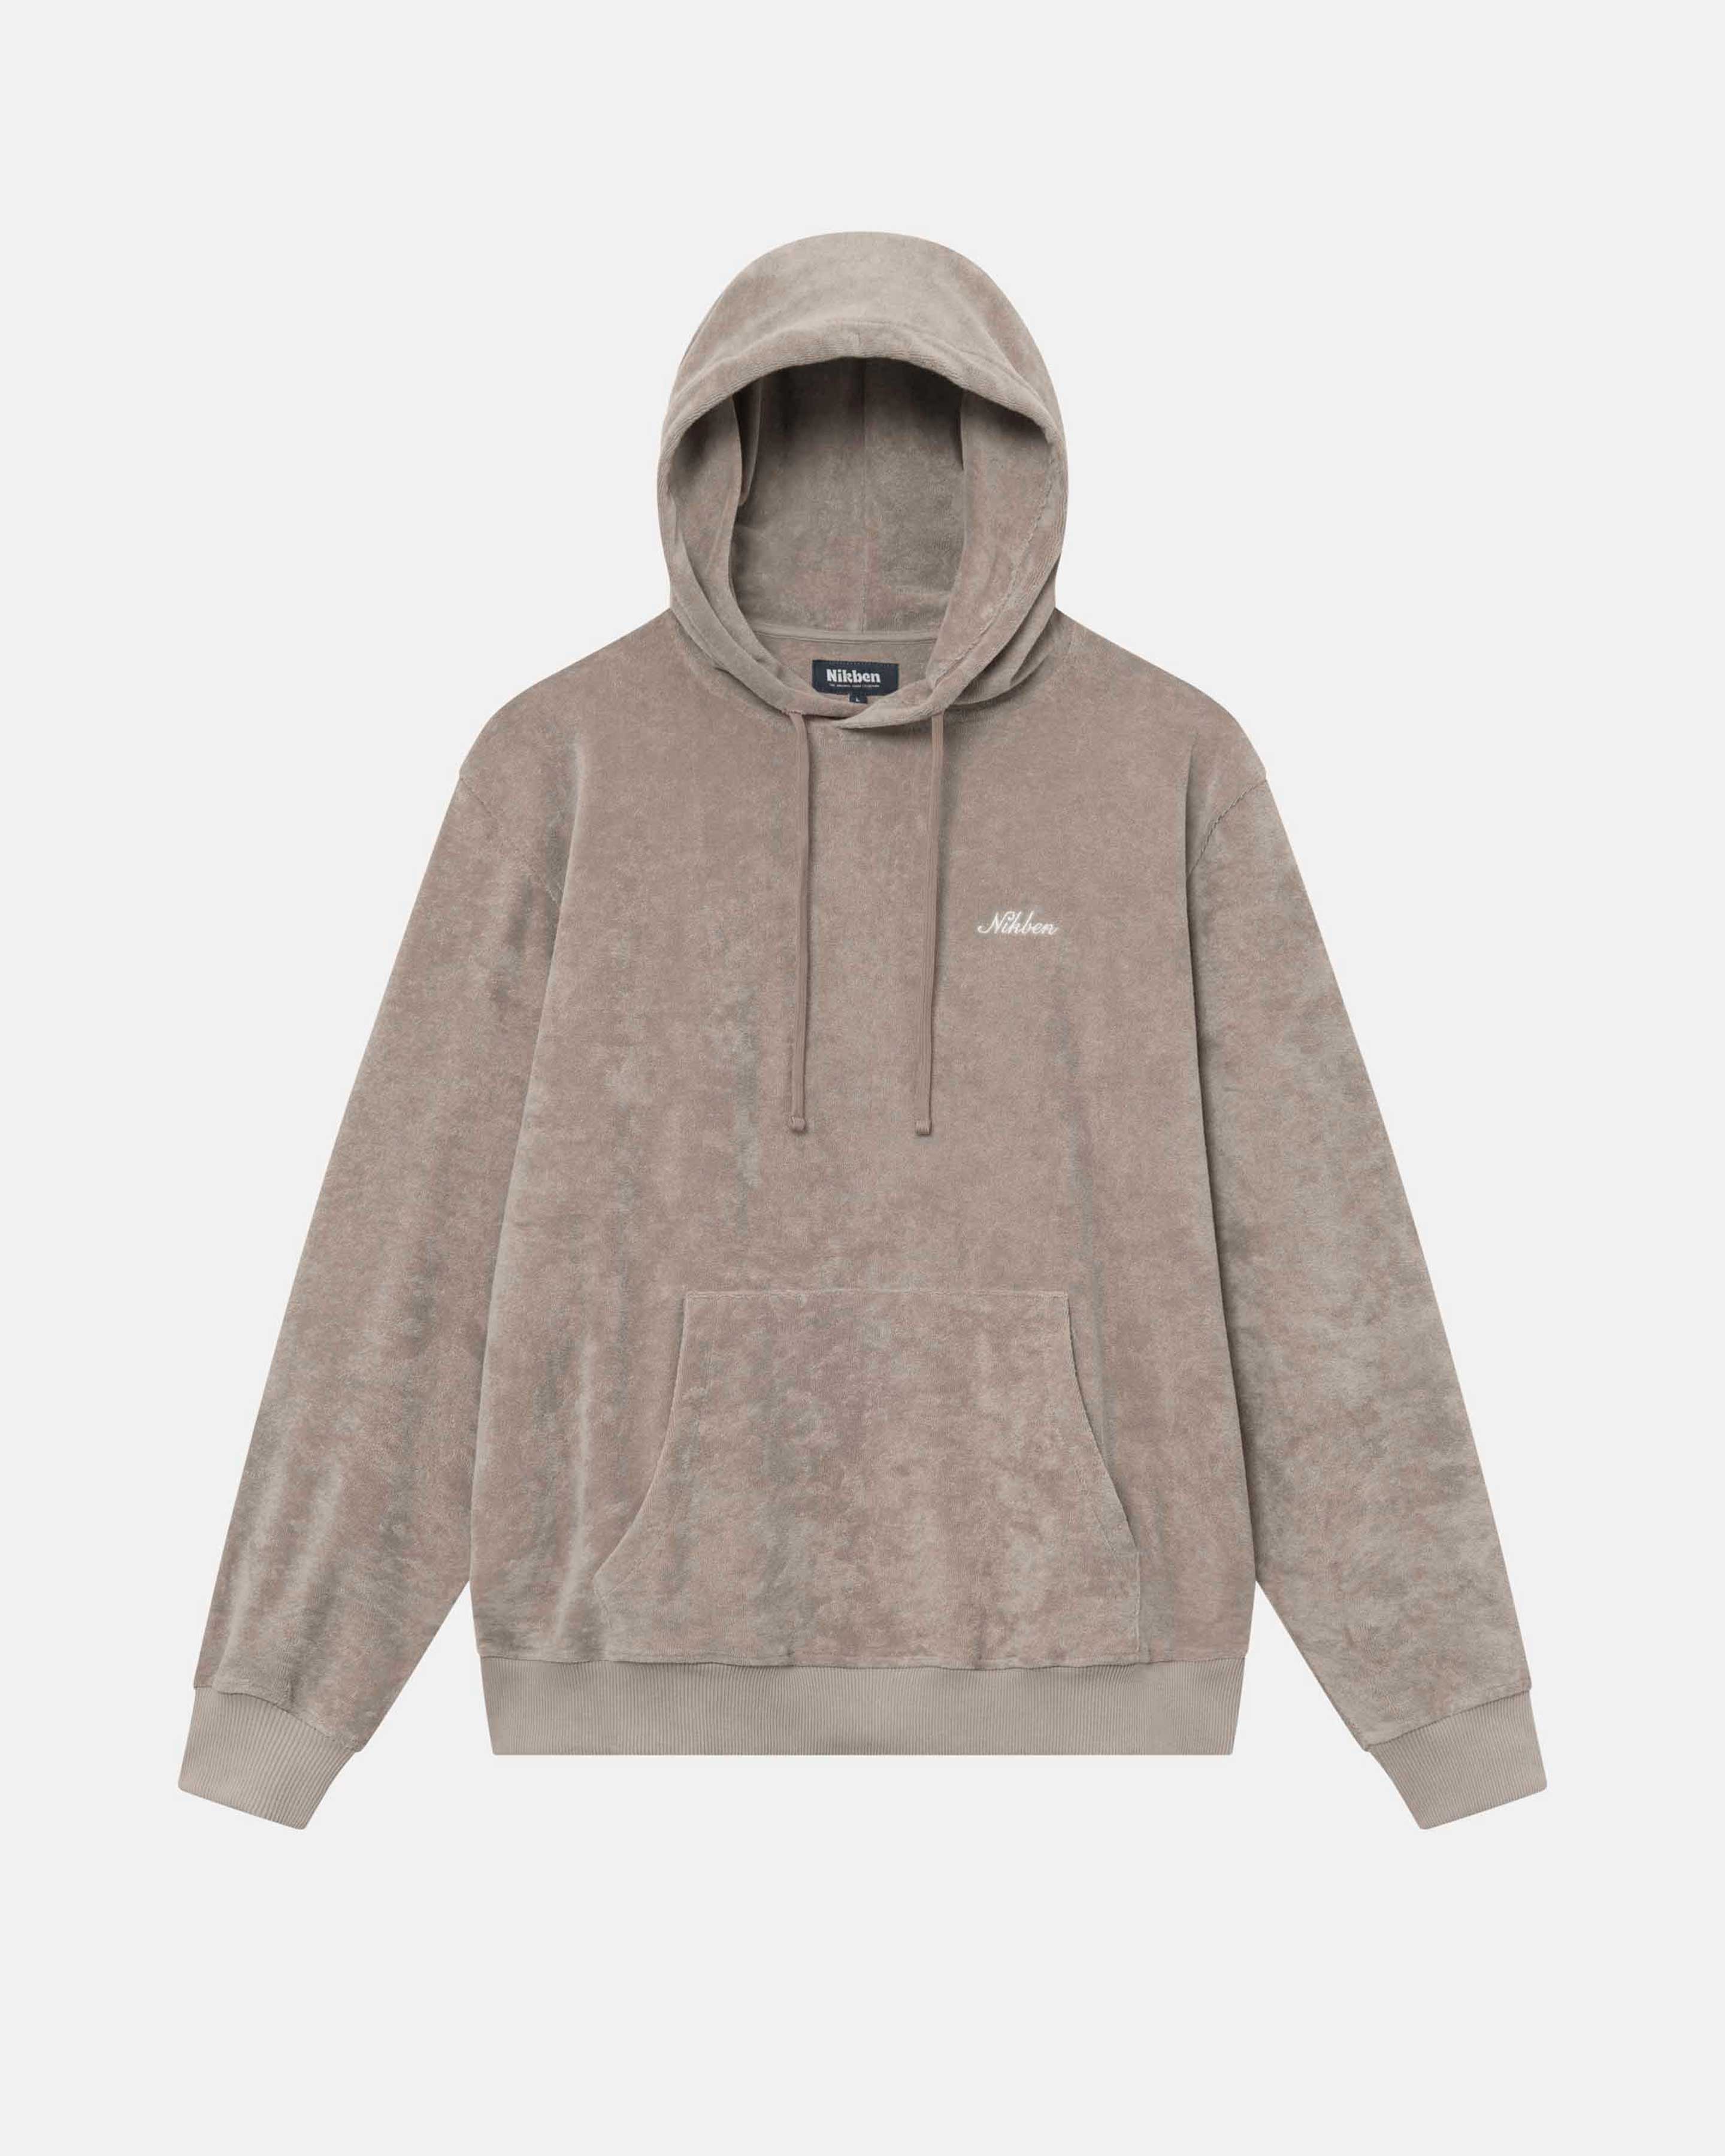 Beige hoodie made from terry toweling cloth. It features drawstrings, a single front pocket, and a white embroidered "Nikben" logo on the chest